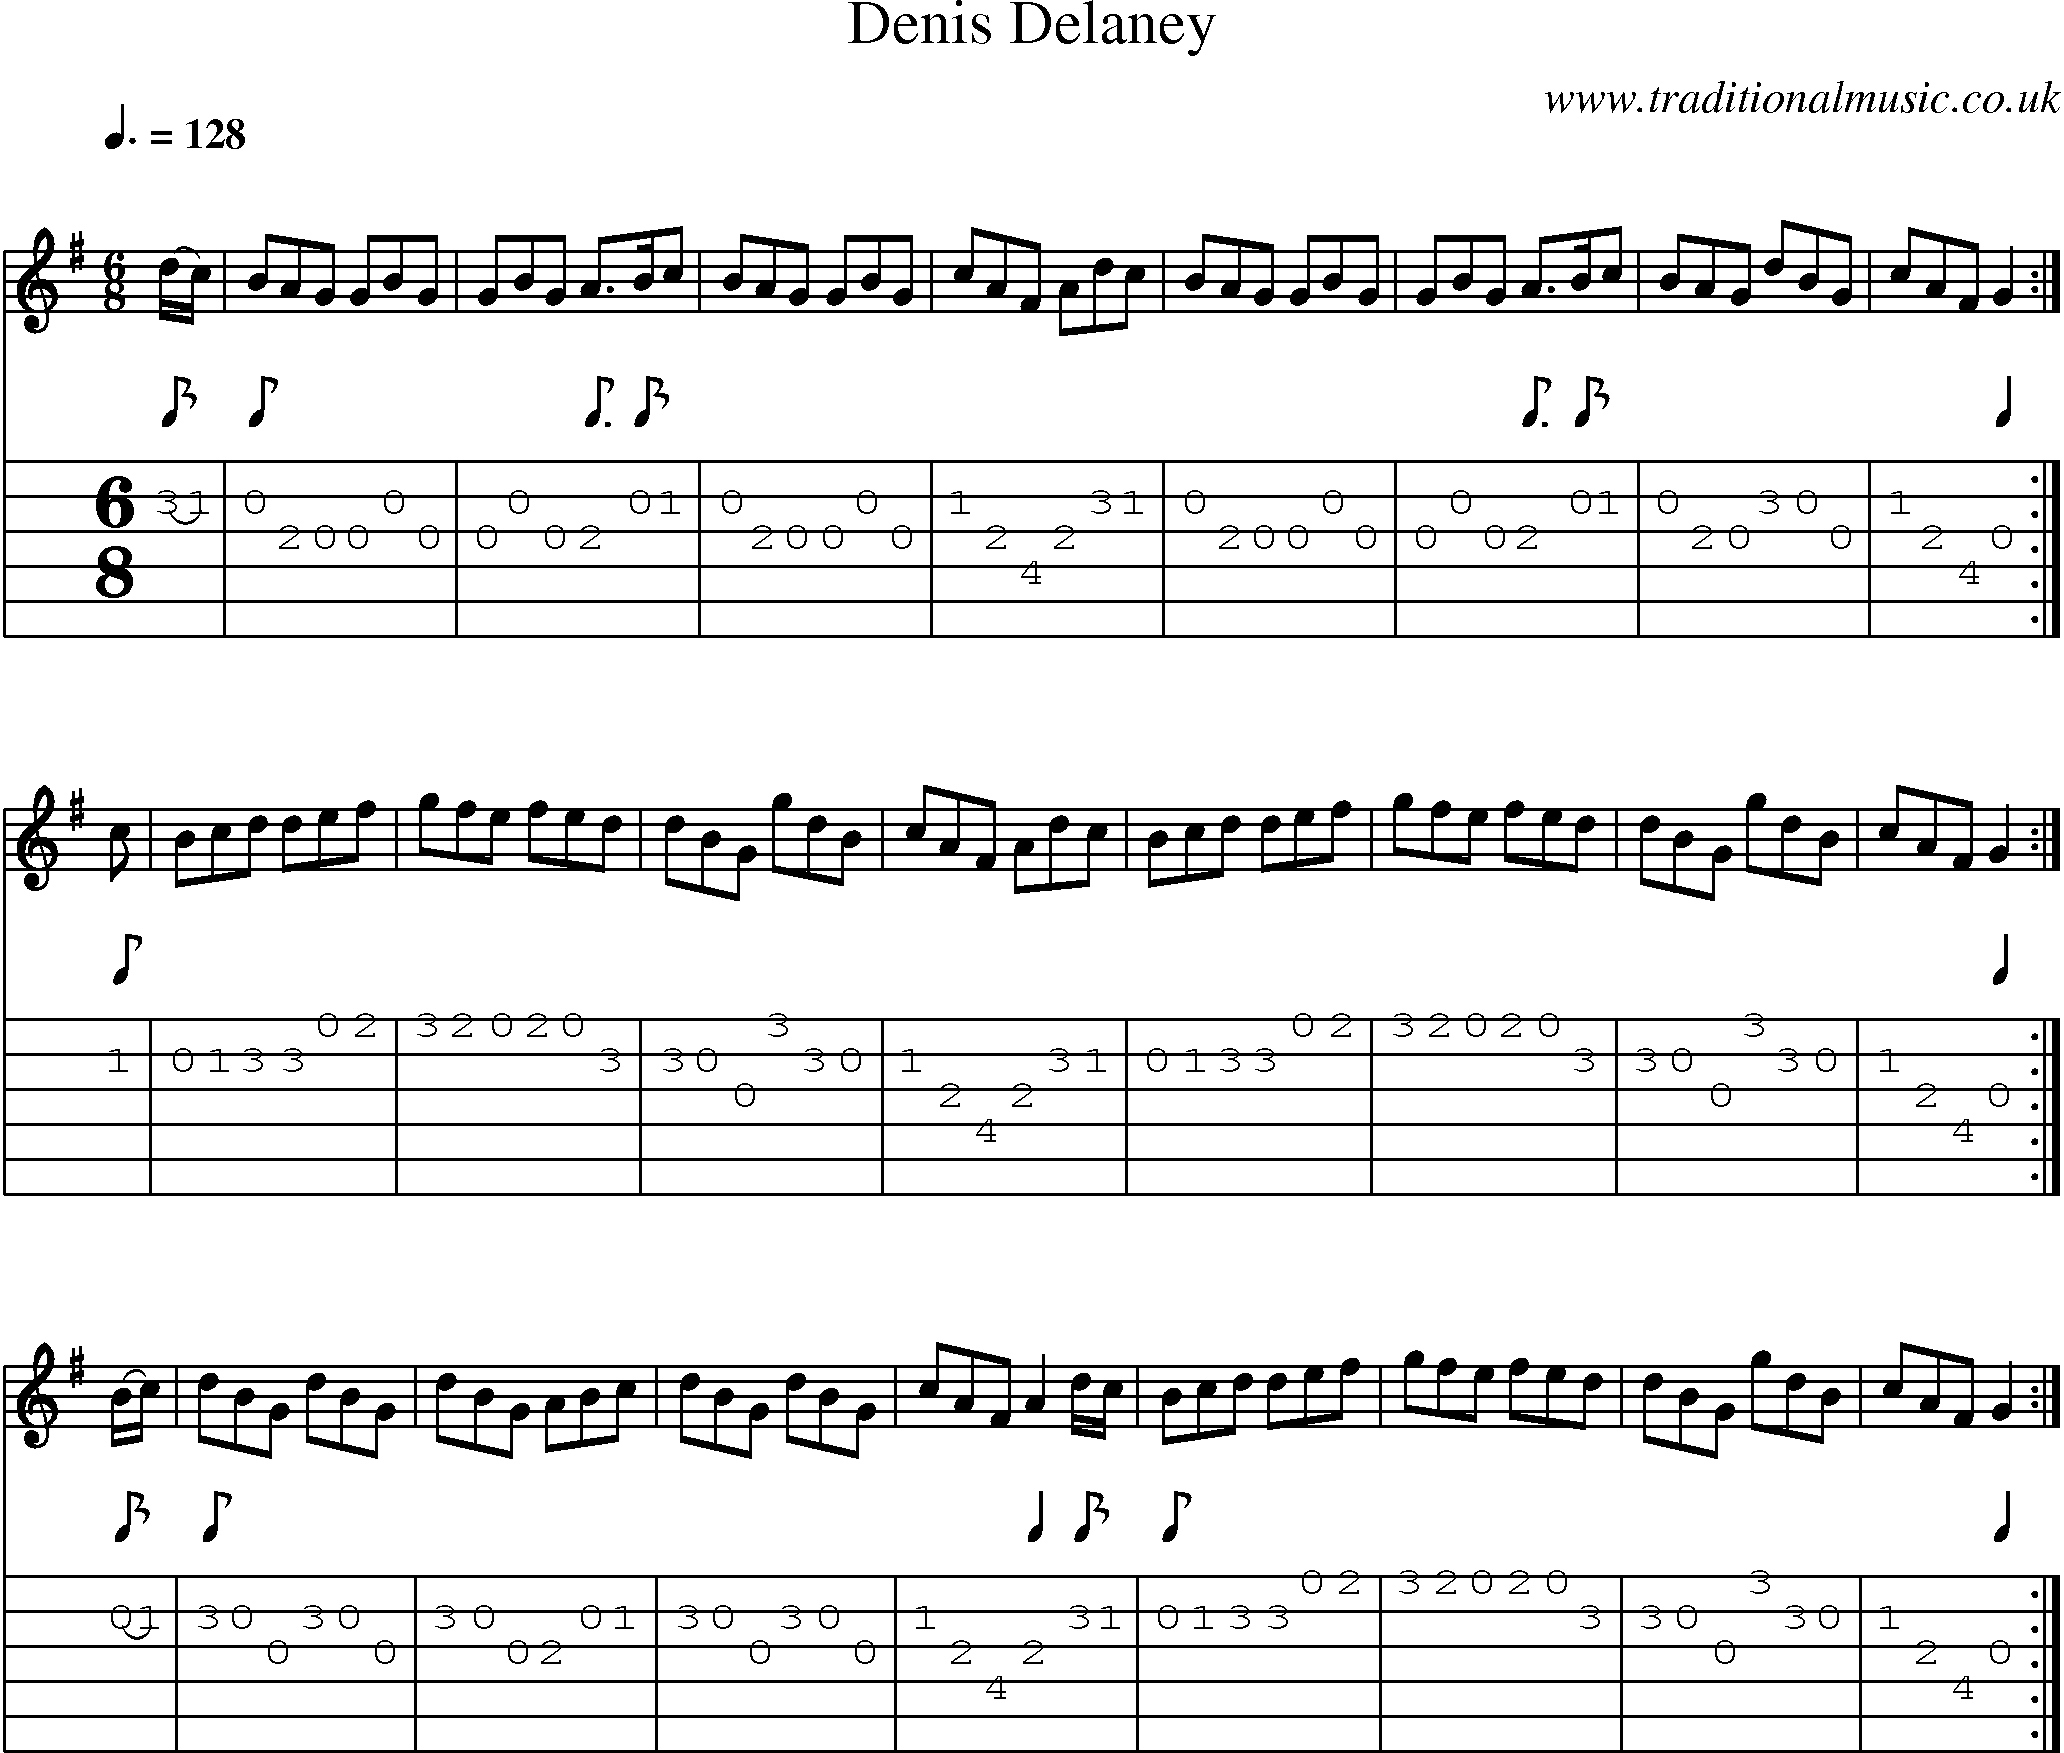 Music Score and Guitar Tabs for Denis Delaney